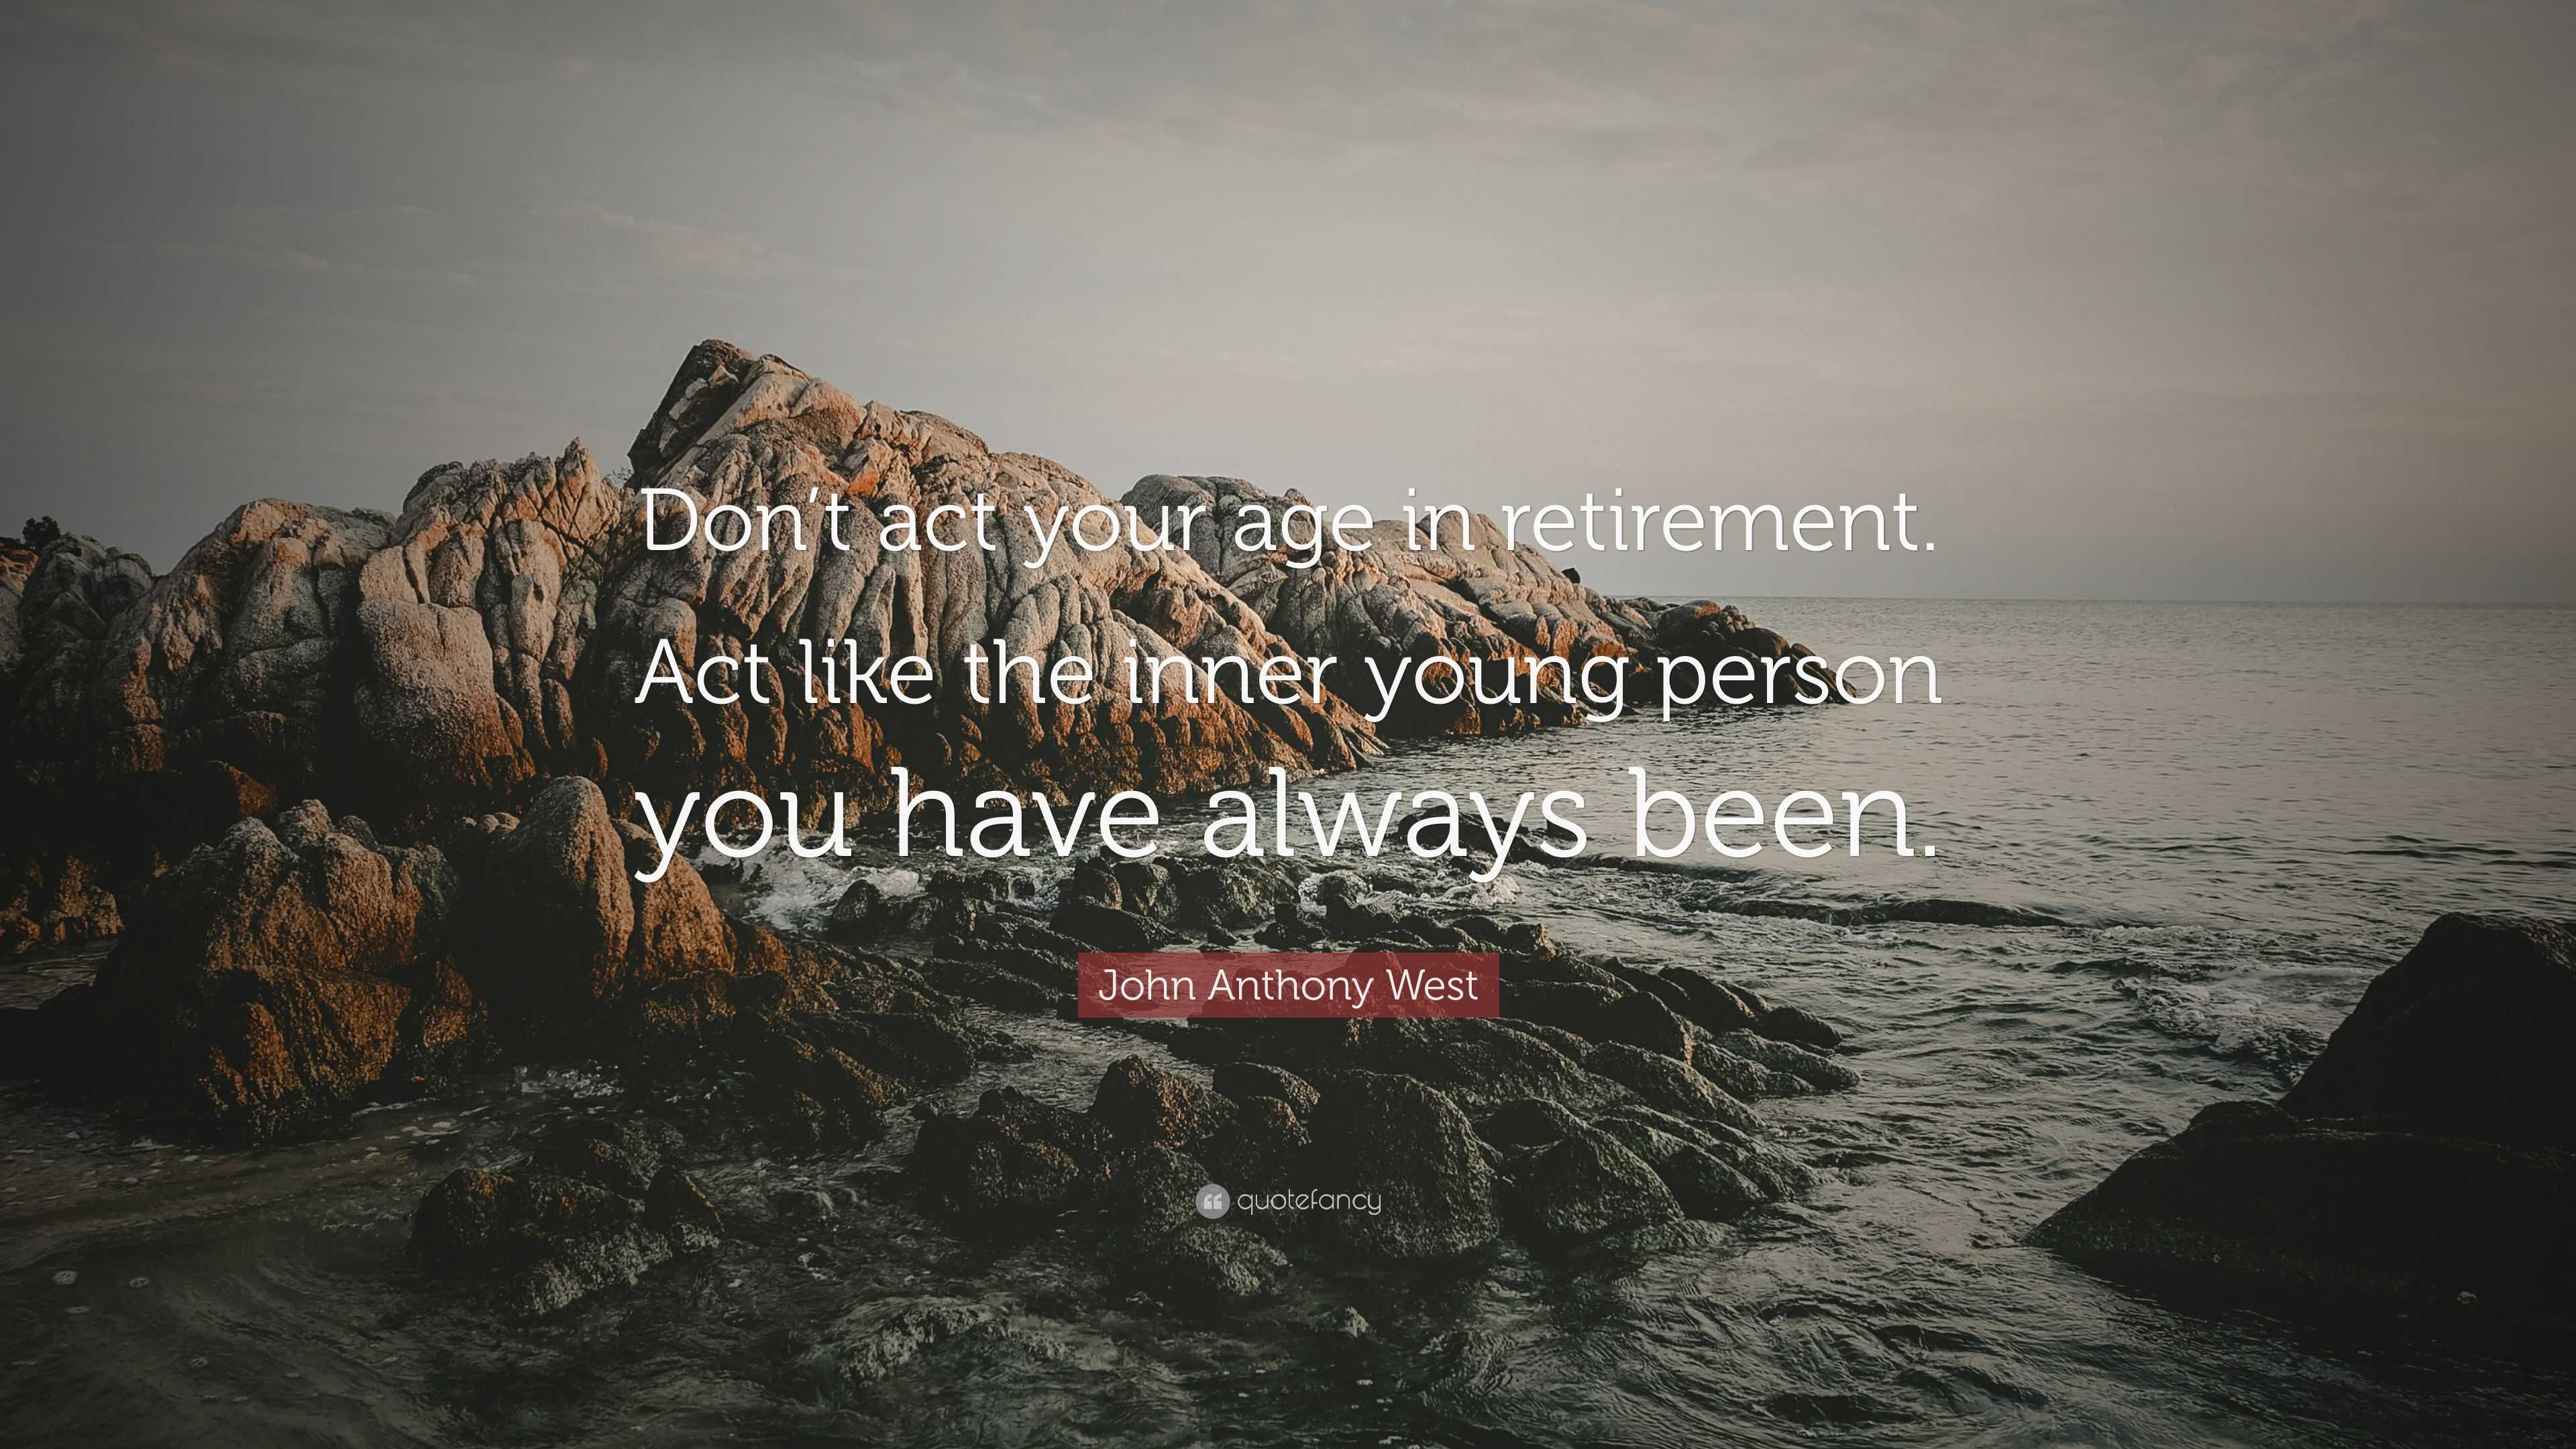 John Anthony West Quote: "Don't act your age in retirement ...